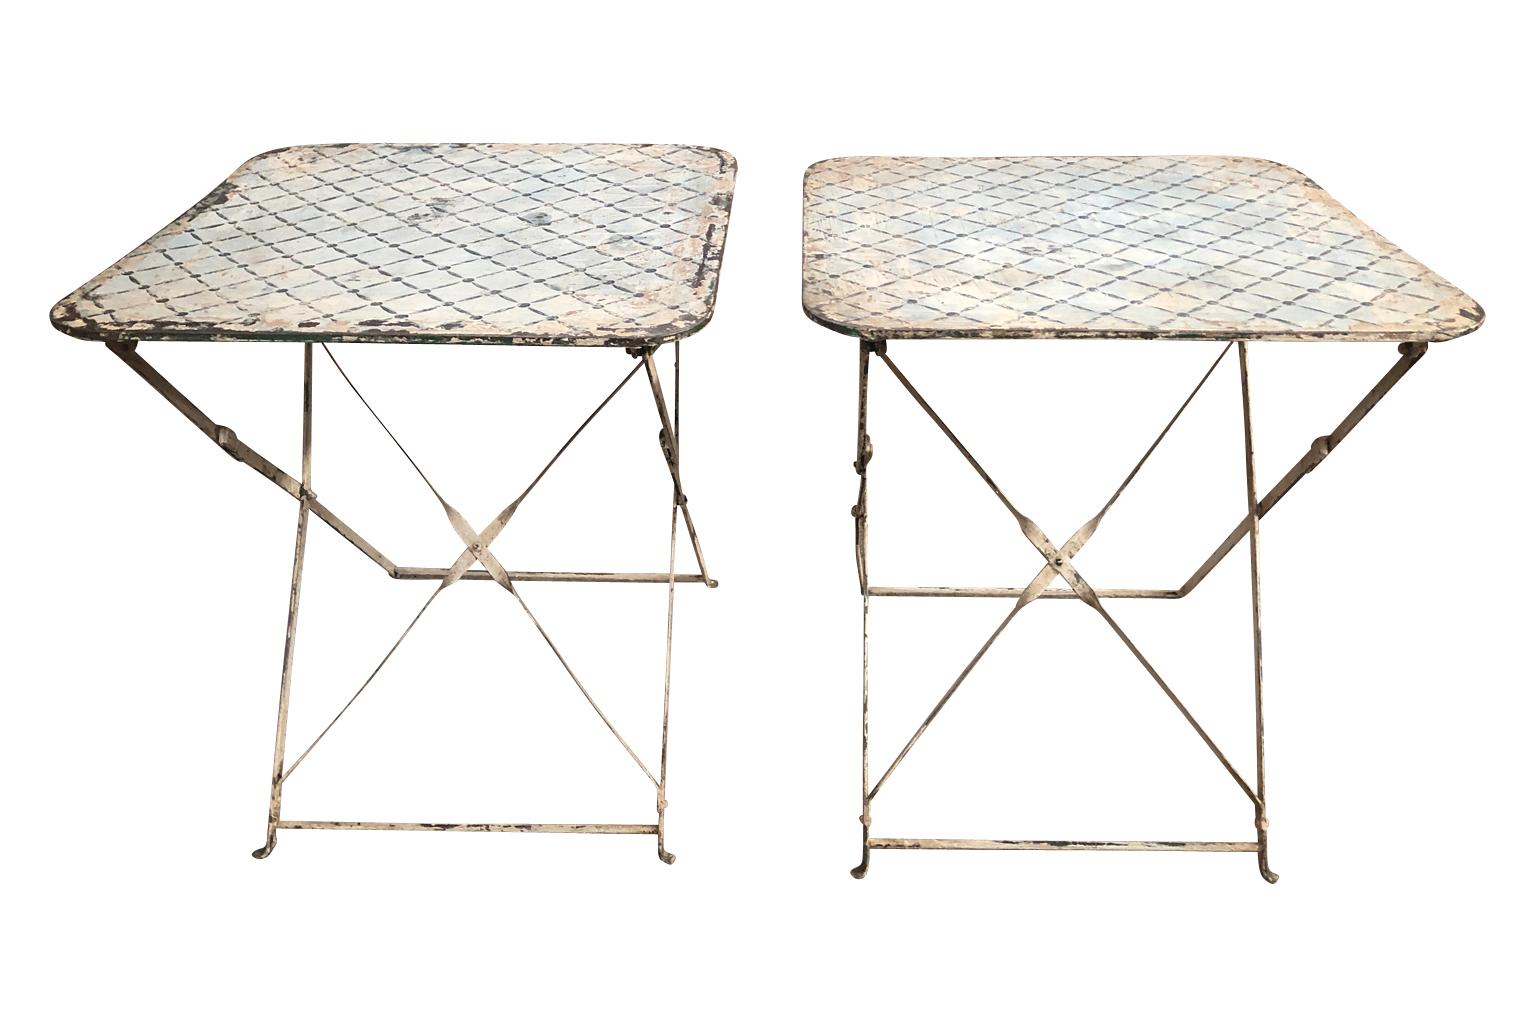 A delightful pair of later 19th century collapsible French garden tables in painted iron. Wonderful motif and painted finish. Perfect end tables for a charming interior or garden, or smaller bedside tables.